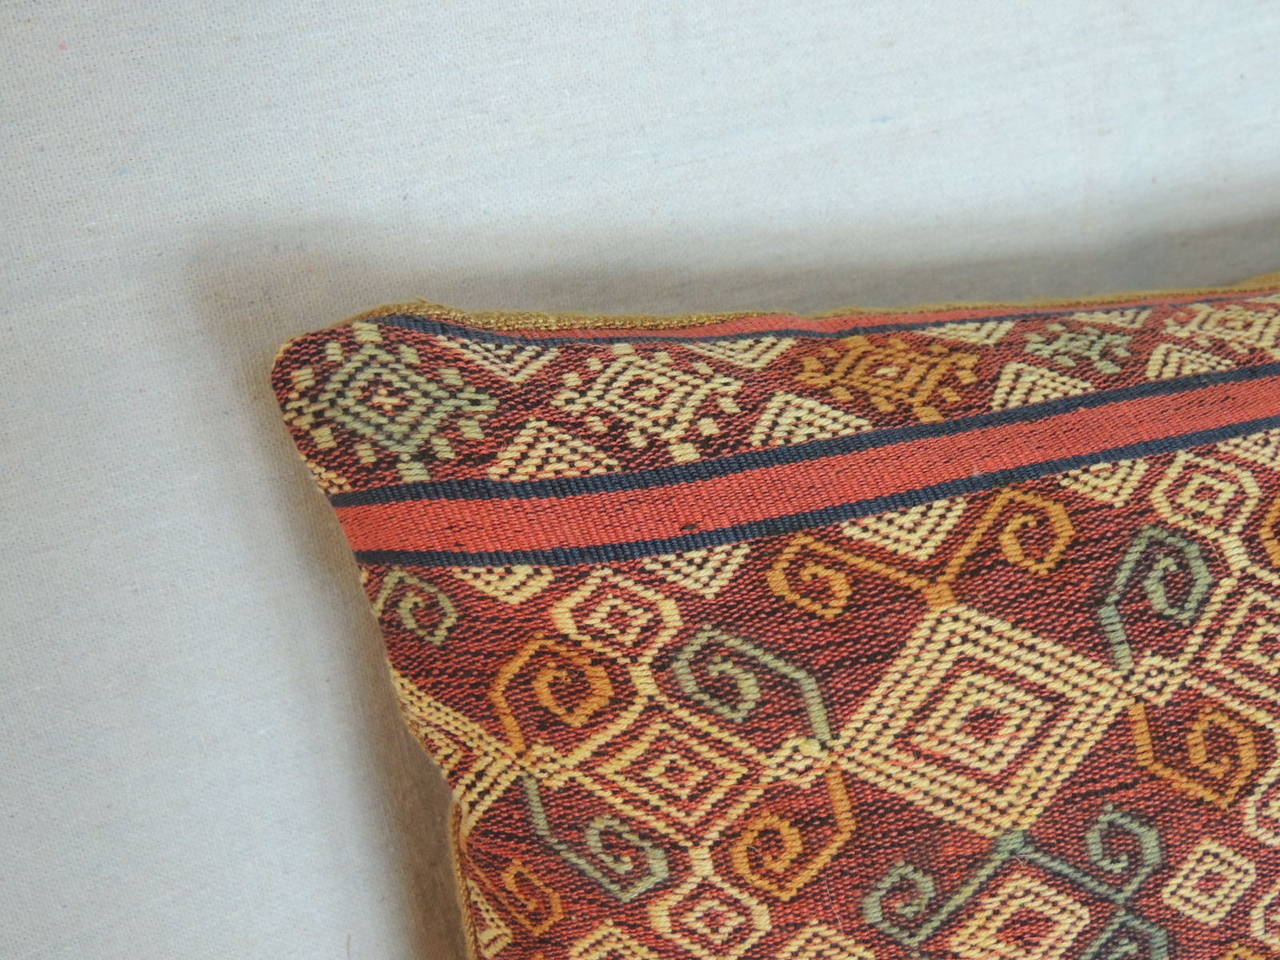 Weave texture weft- Ikat bolster pillow in shades of orange, yellow and red. Strie linen backing.